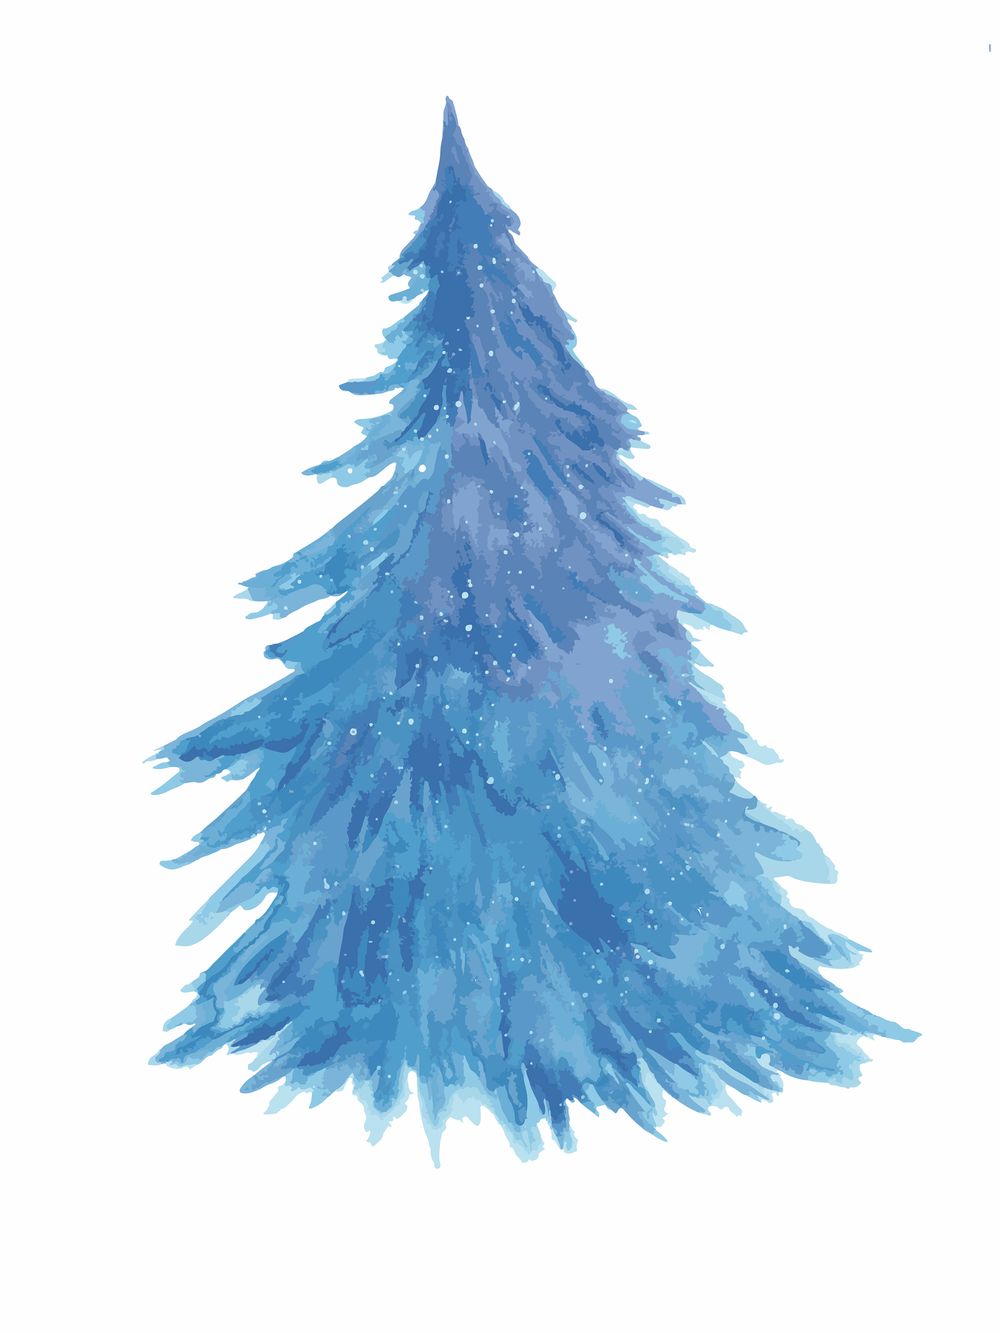 Simple tree drawing watercolor brush strokes with lights